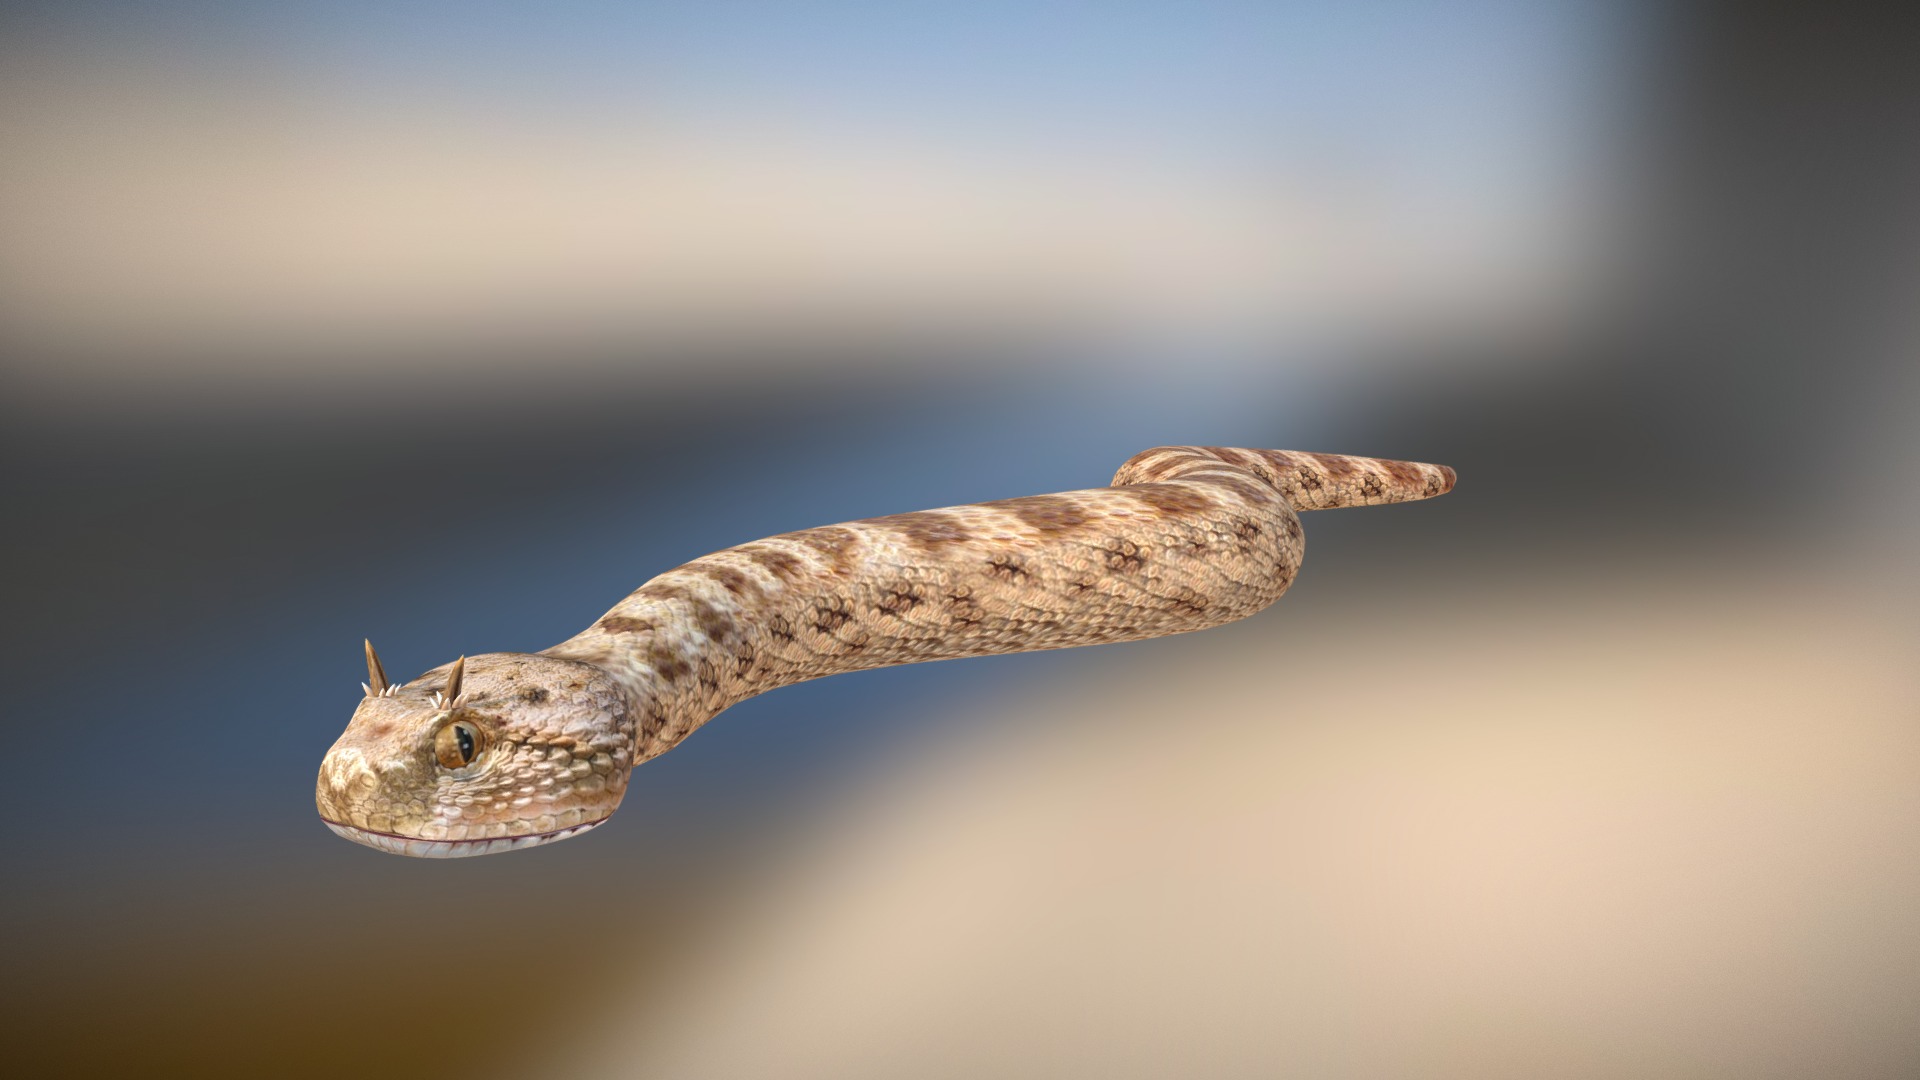 3D model Horned viper - This is a 3D model of the Horned viper. The 3D model is about a snake in the water.